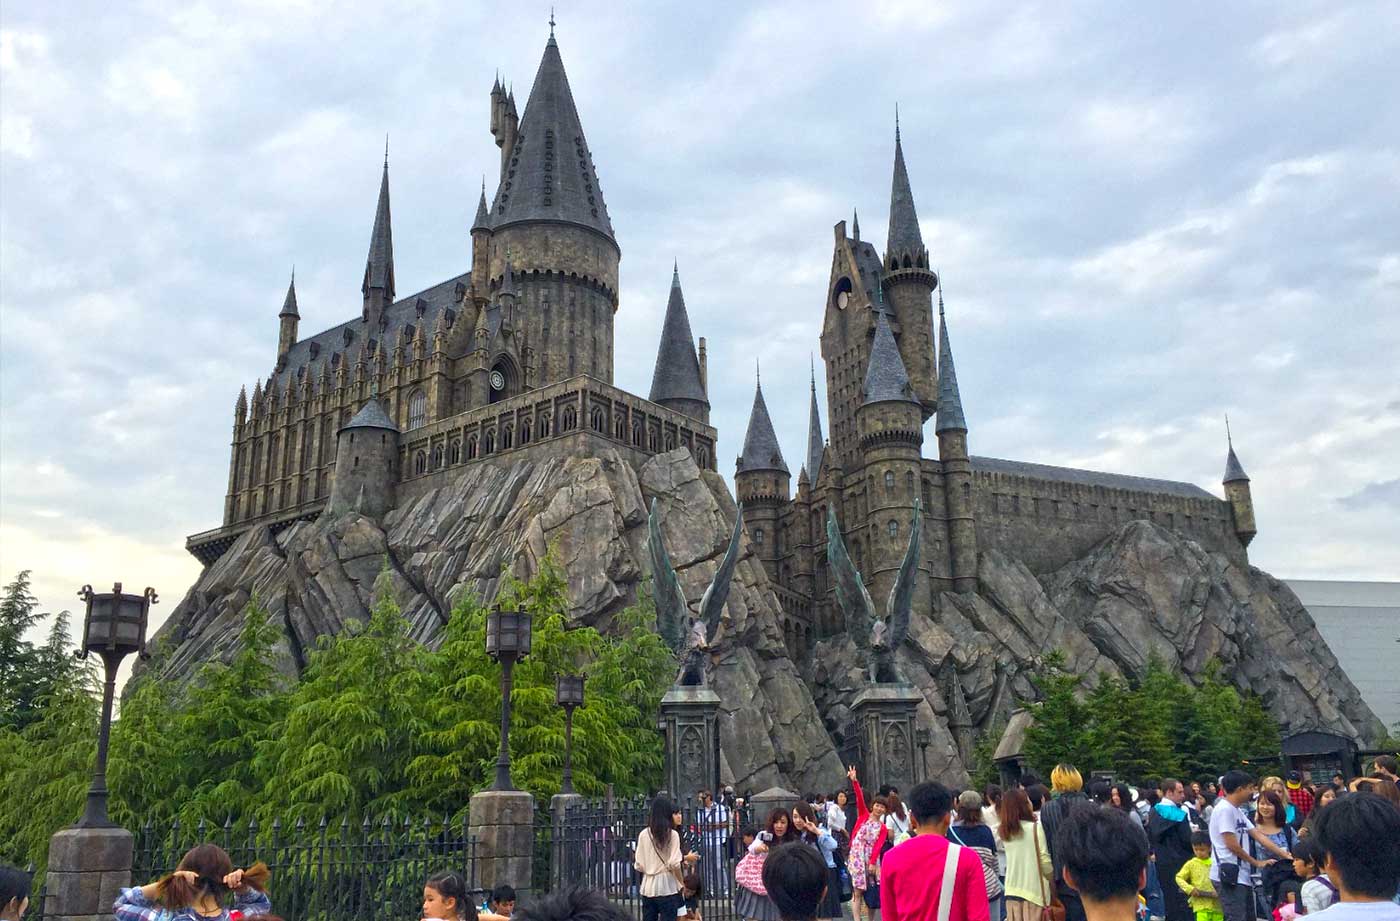 The Wizarding World of Harry Potter in LA